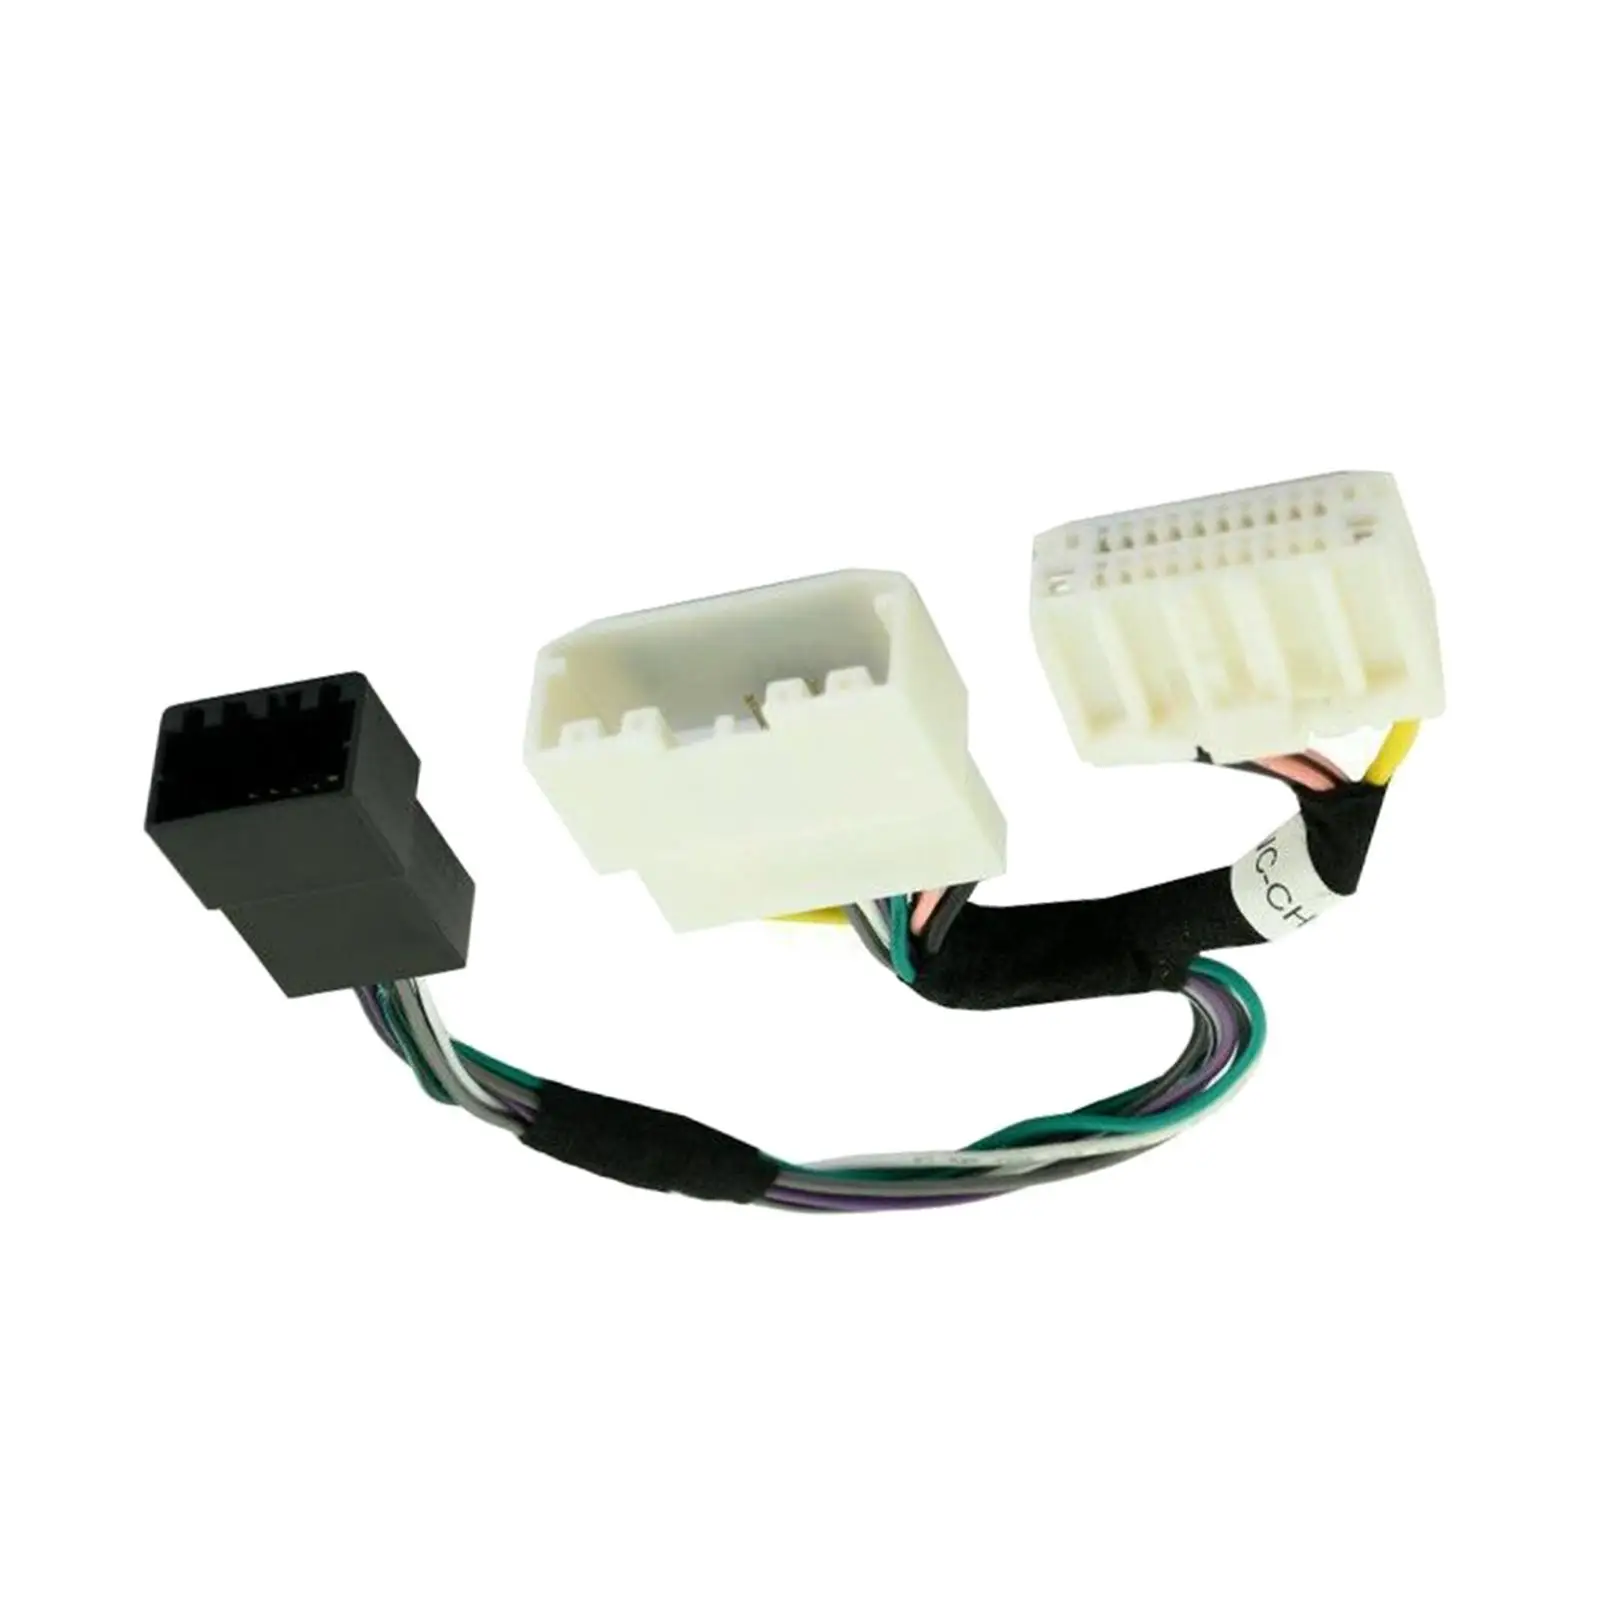 Anc-Ch01 Direct Replaces Durable Easy to Install Accessories ANC Module Bypass Harness for Chrysler, Jeep, RAM